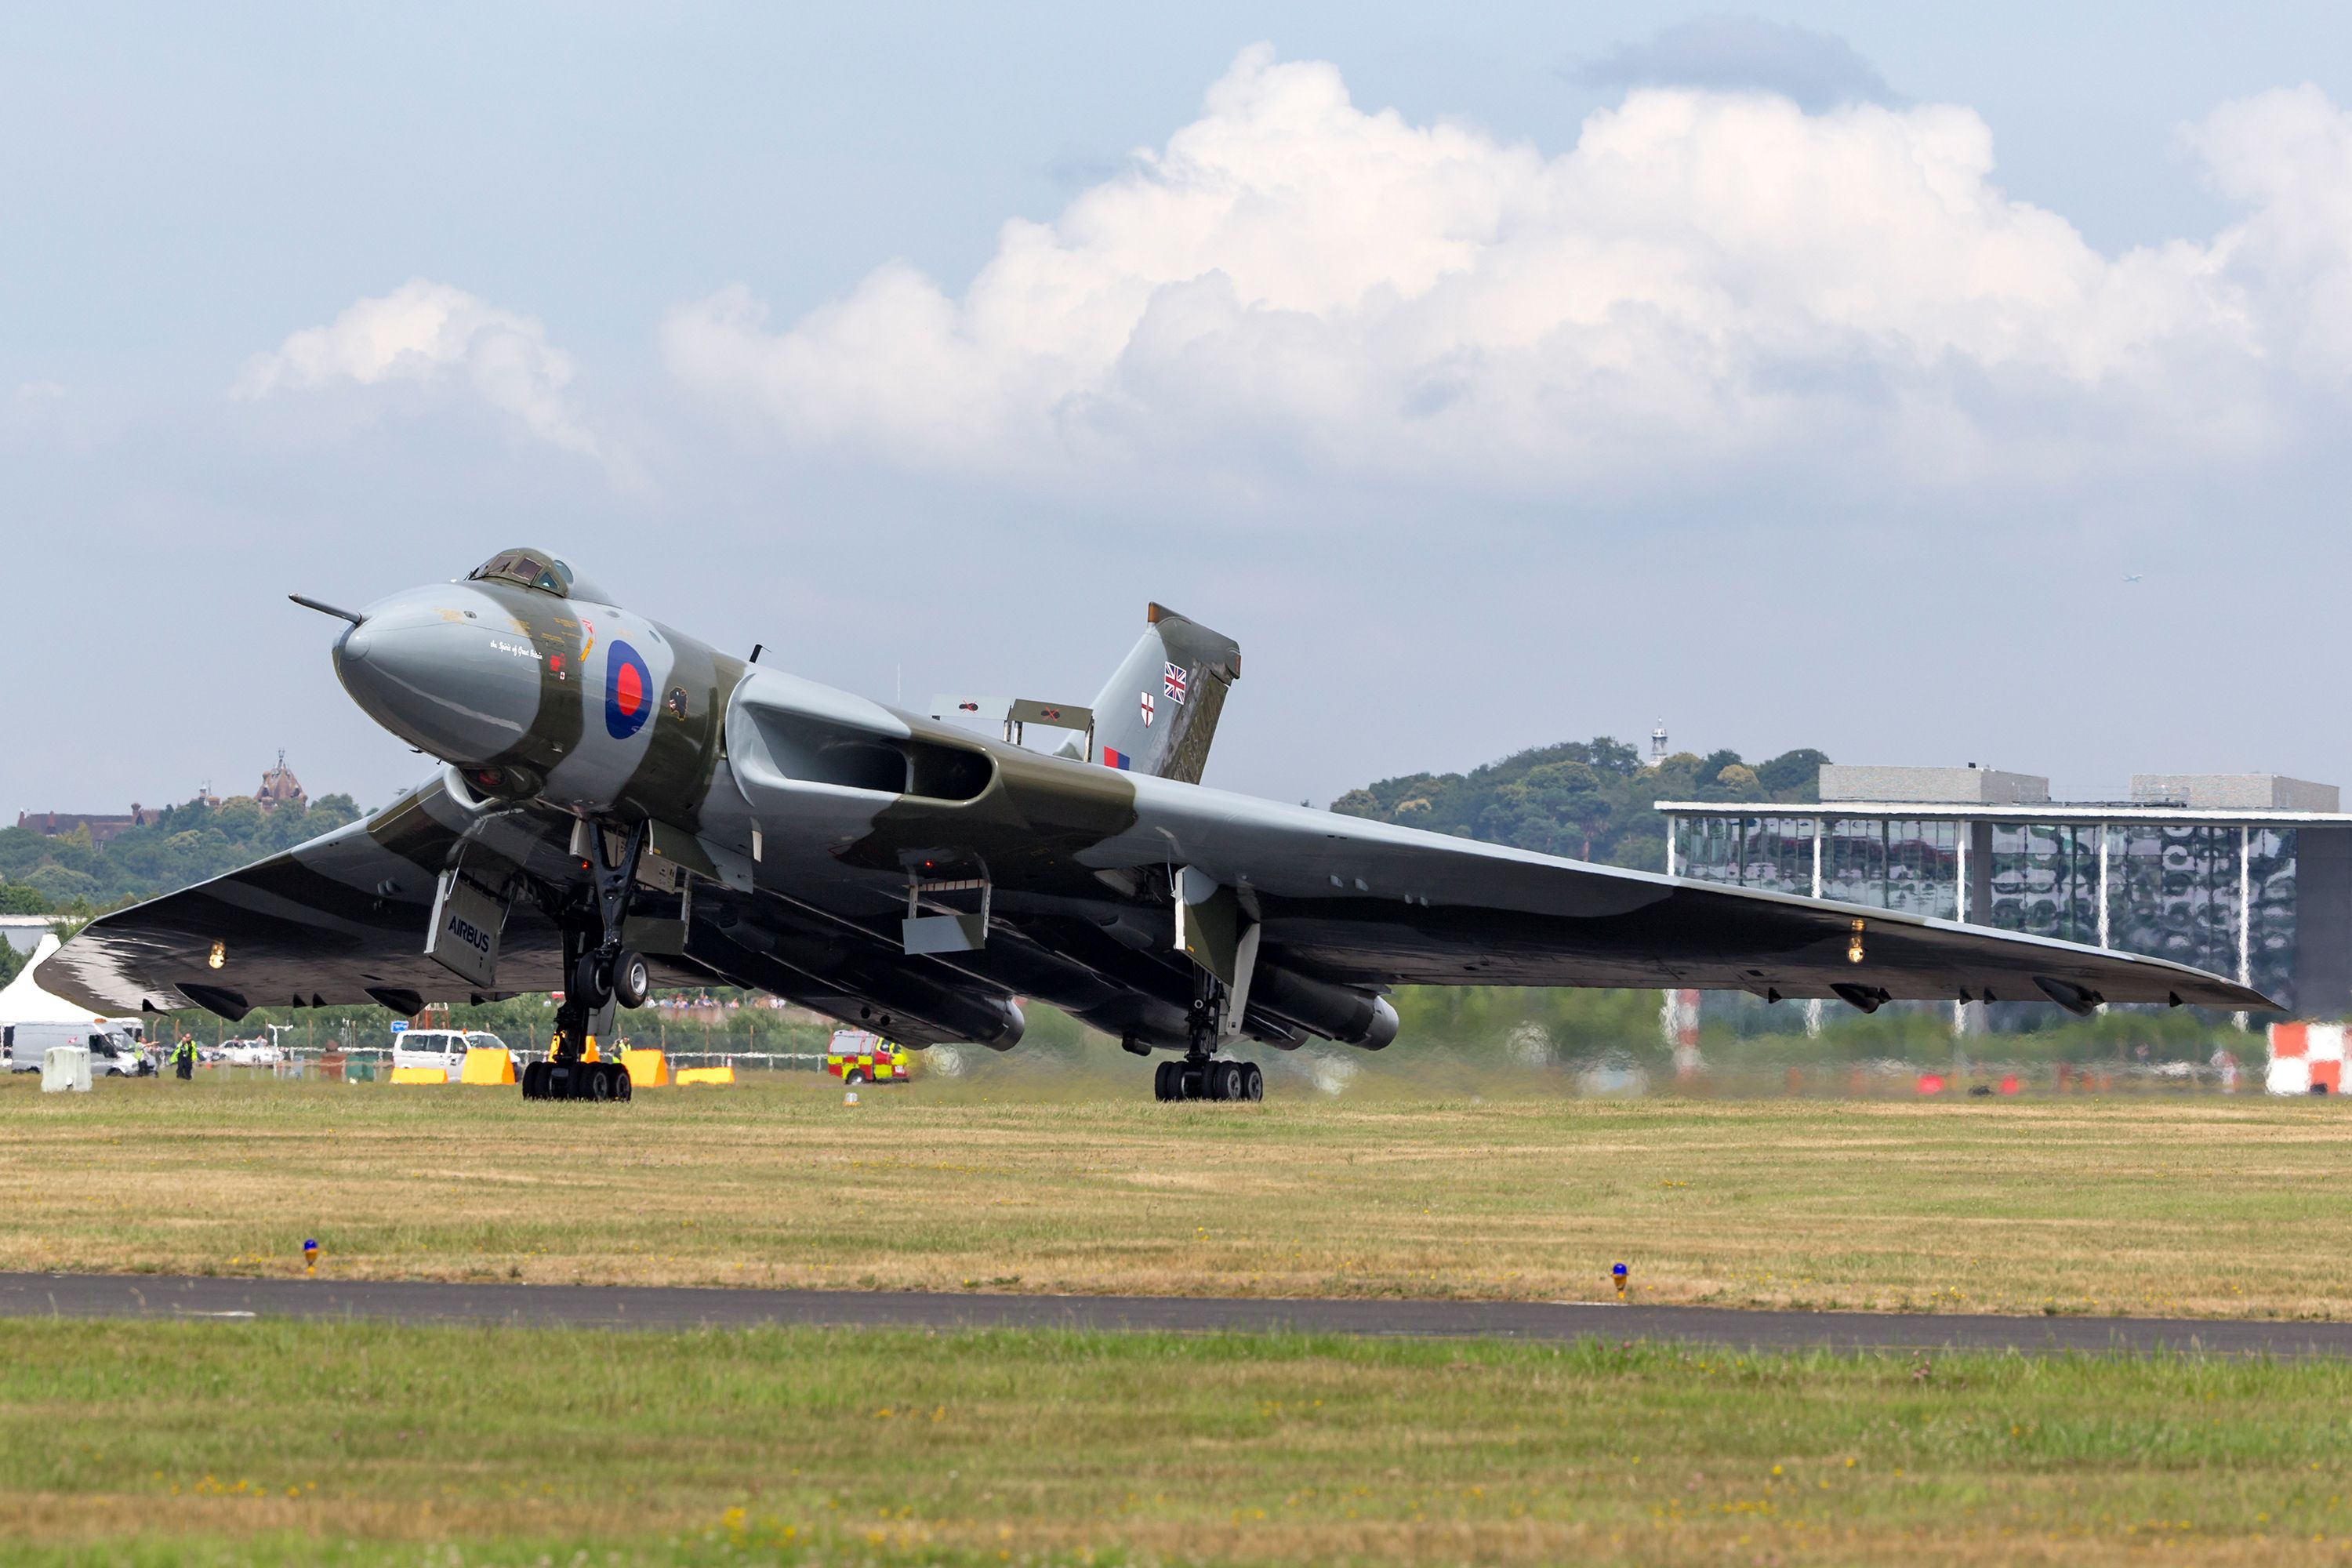 An Avro Vulcan about to take off from a runway.